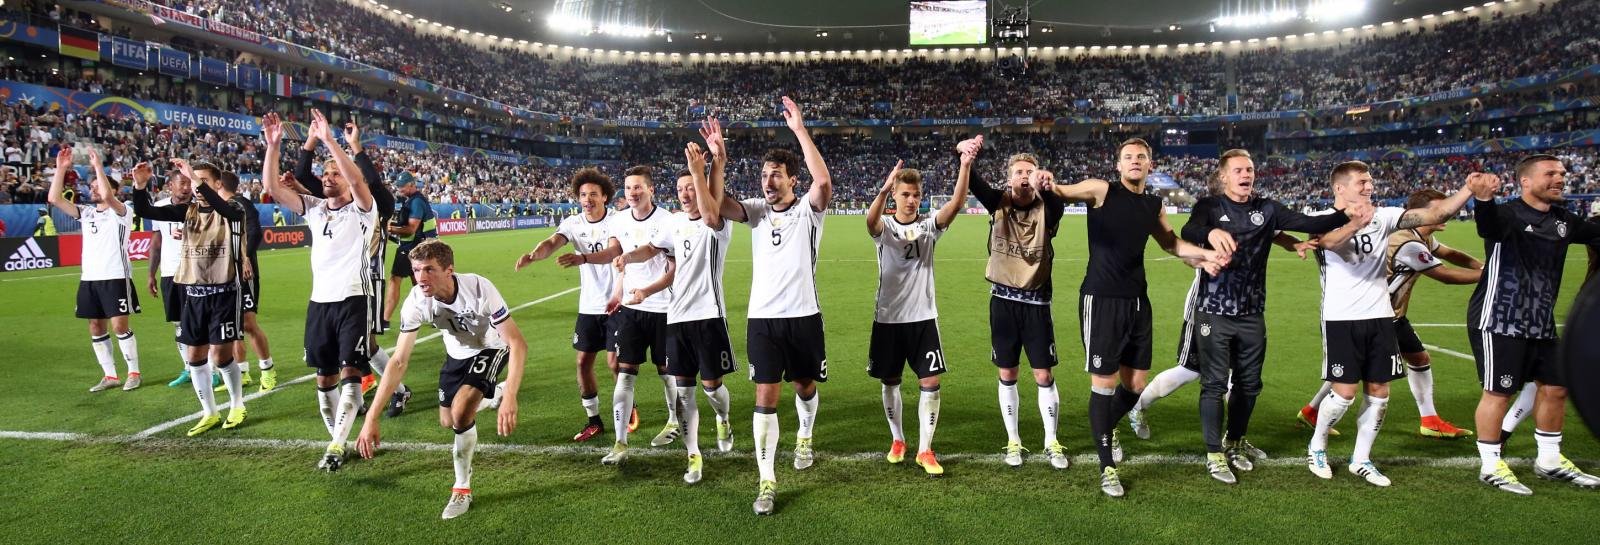 Germany 1-1 Italy (AET): EURO 2016 Quarter-Final Report (Germany win 6-5 on penalties)